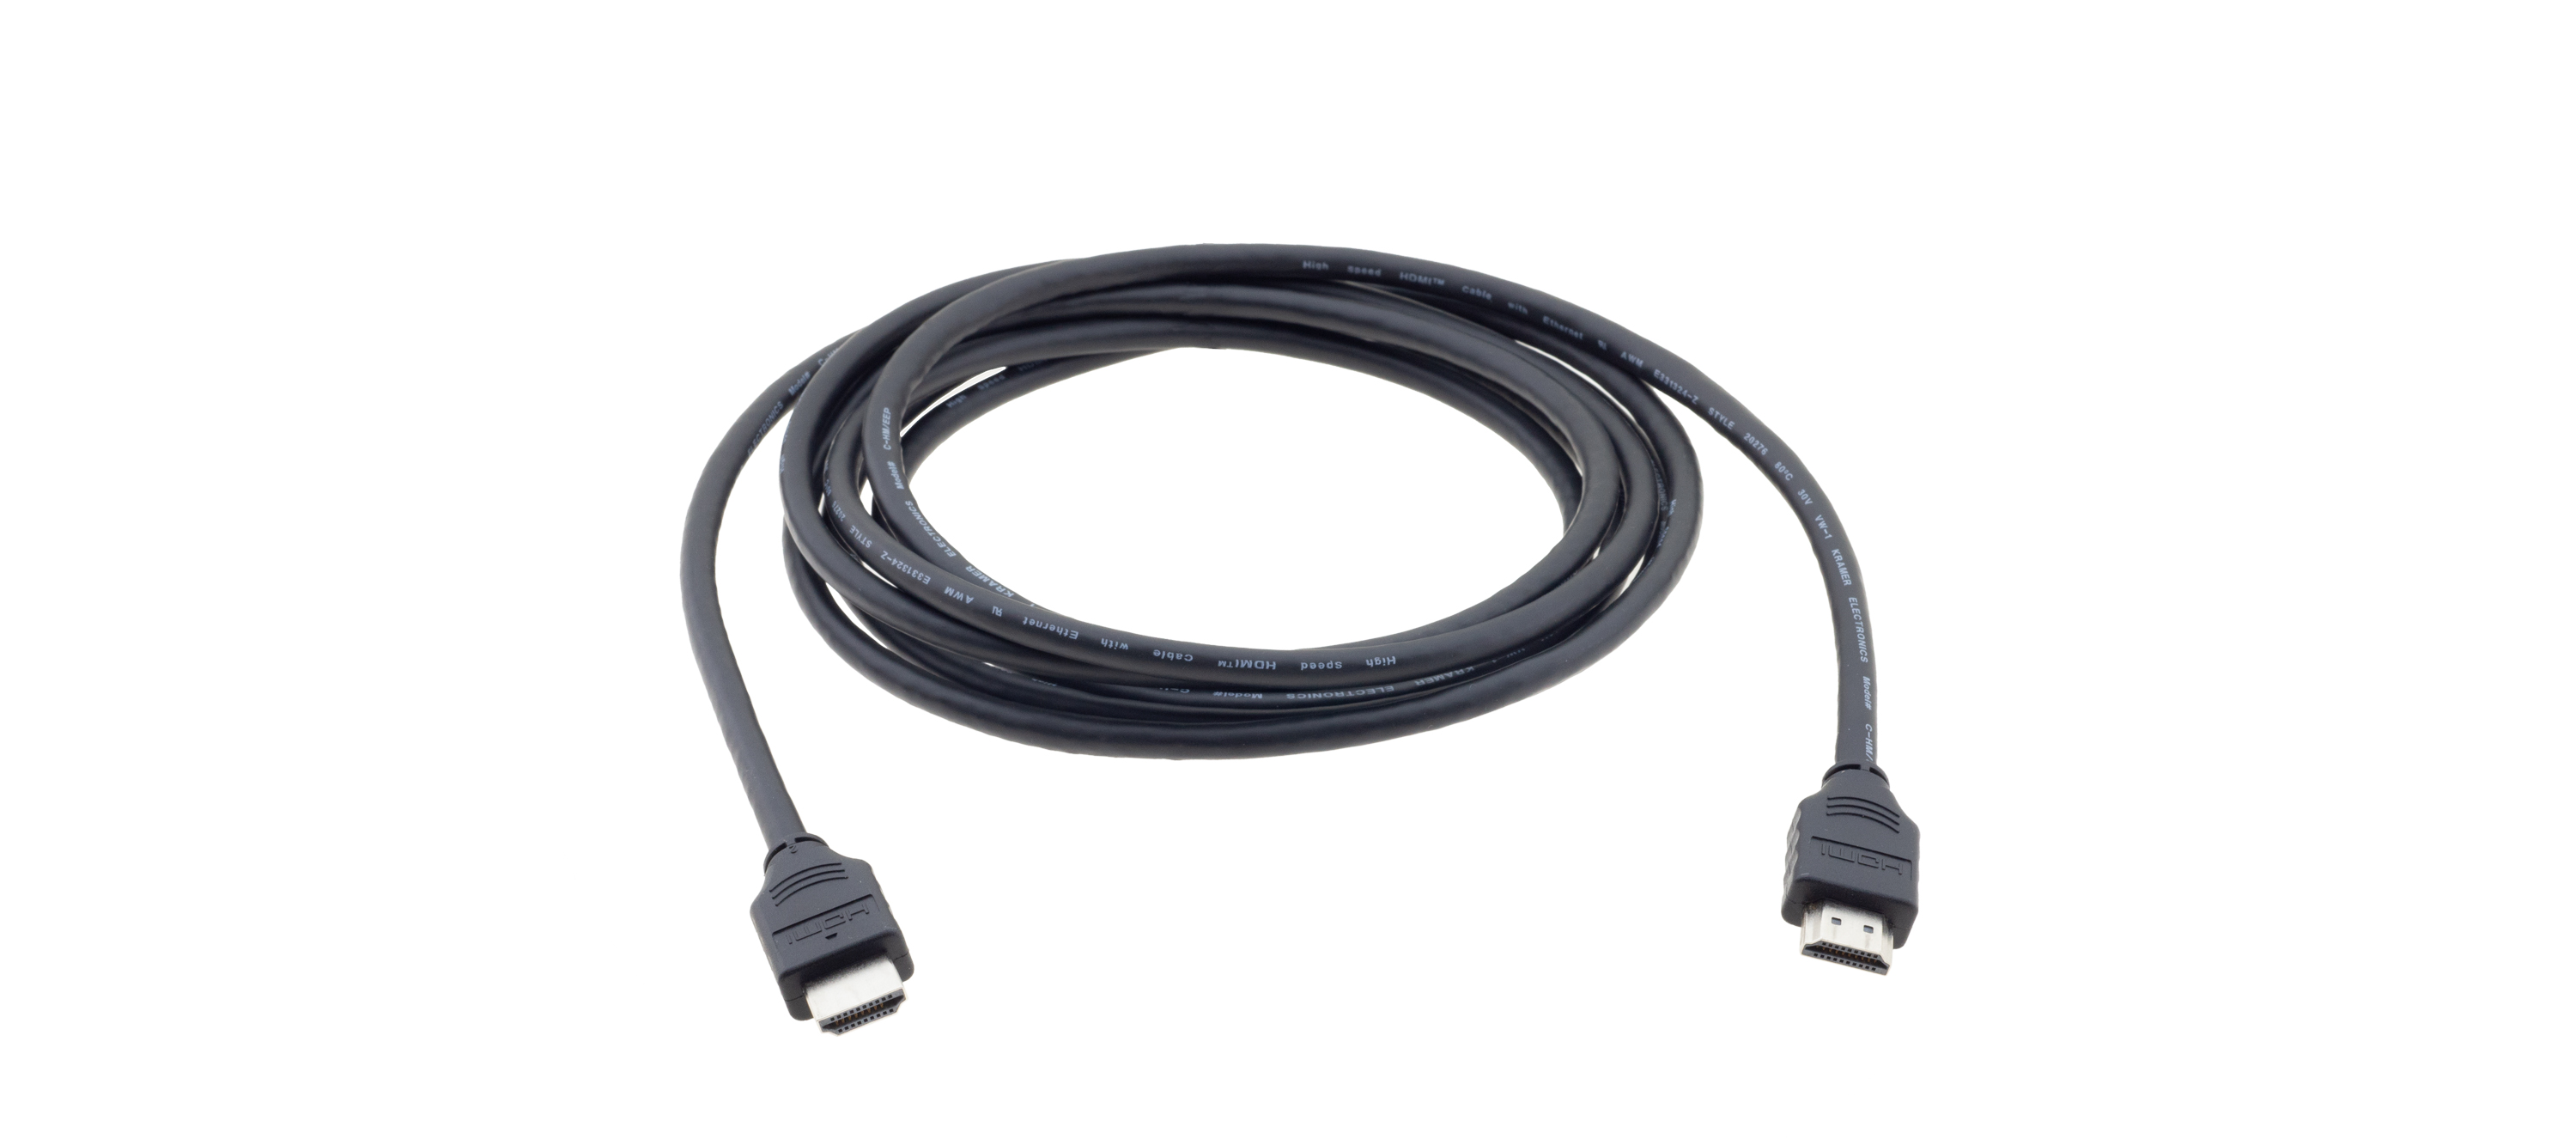 C-HM/EEP-10 High speed HDMI cable with Ethernet Cable (10')